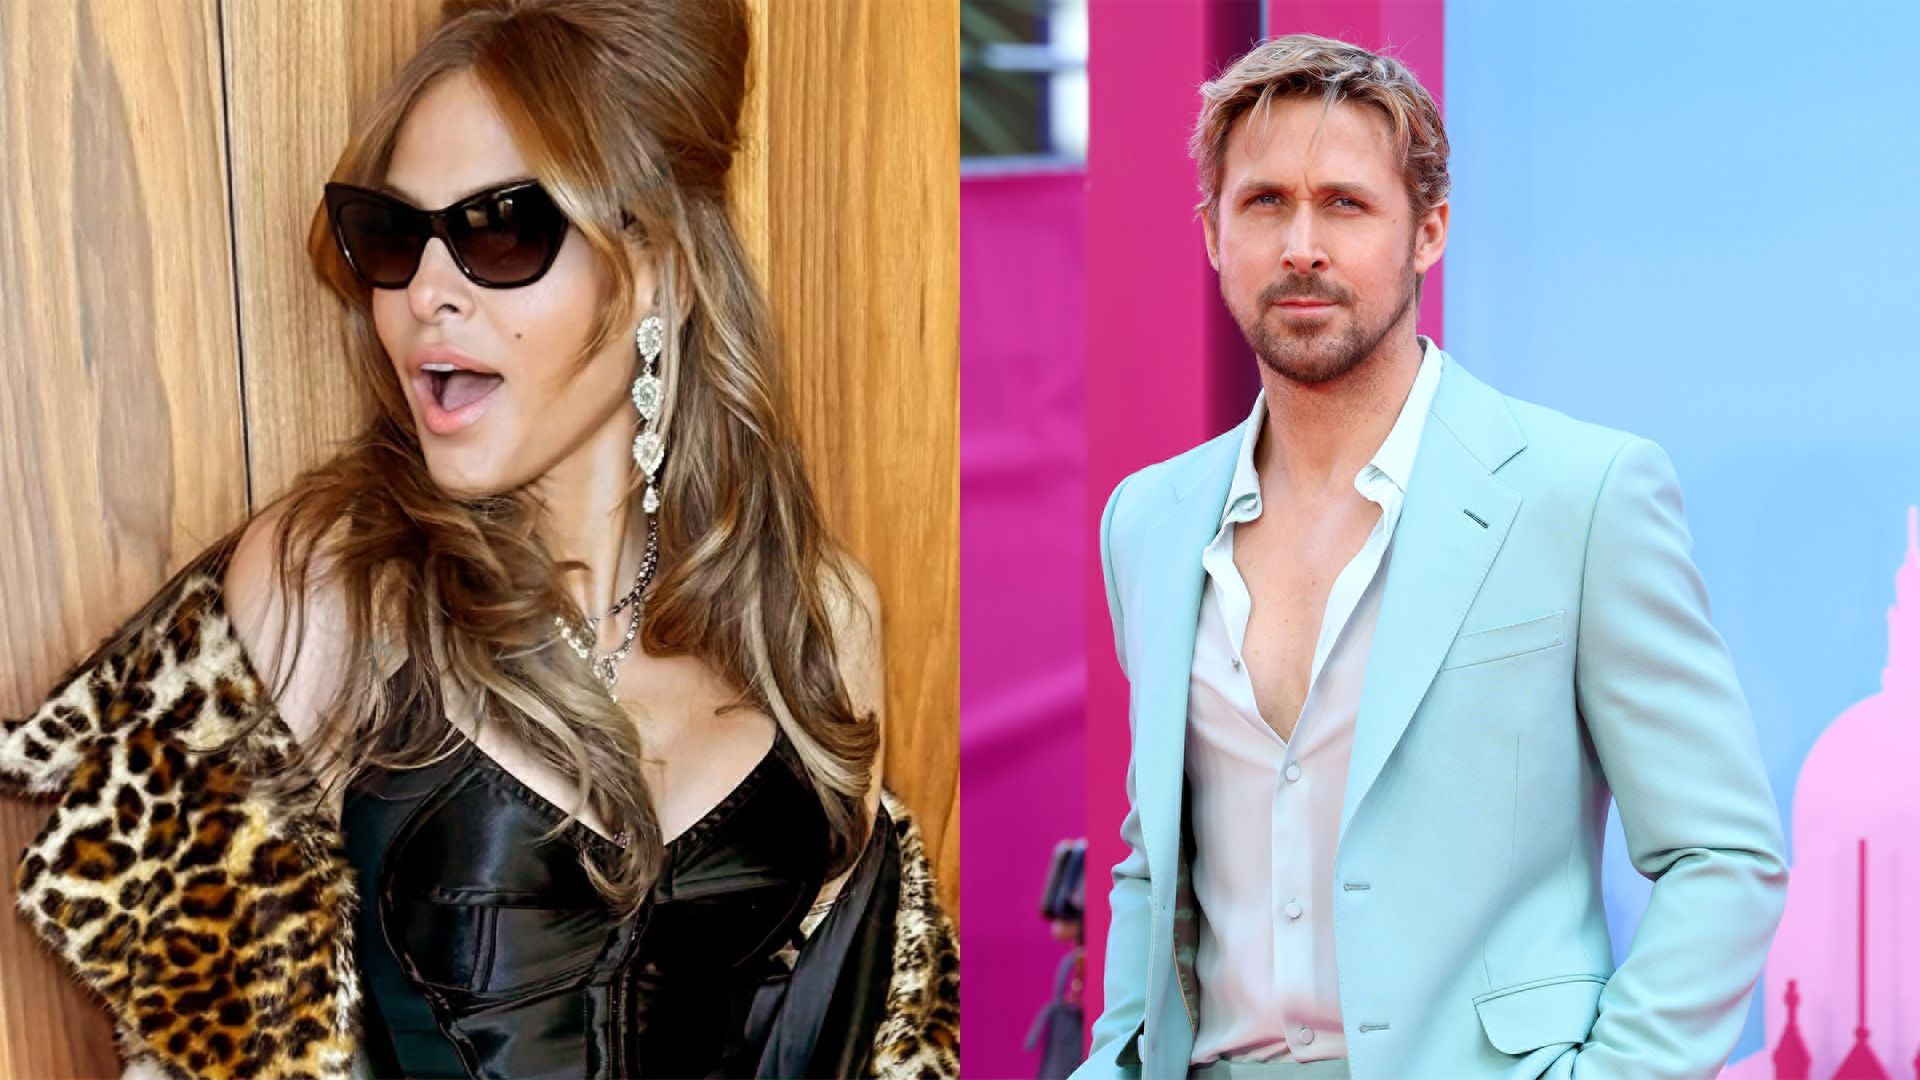 Eva Mendes looks besotted with Ryan Gosling as she posts rare photos of them together